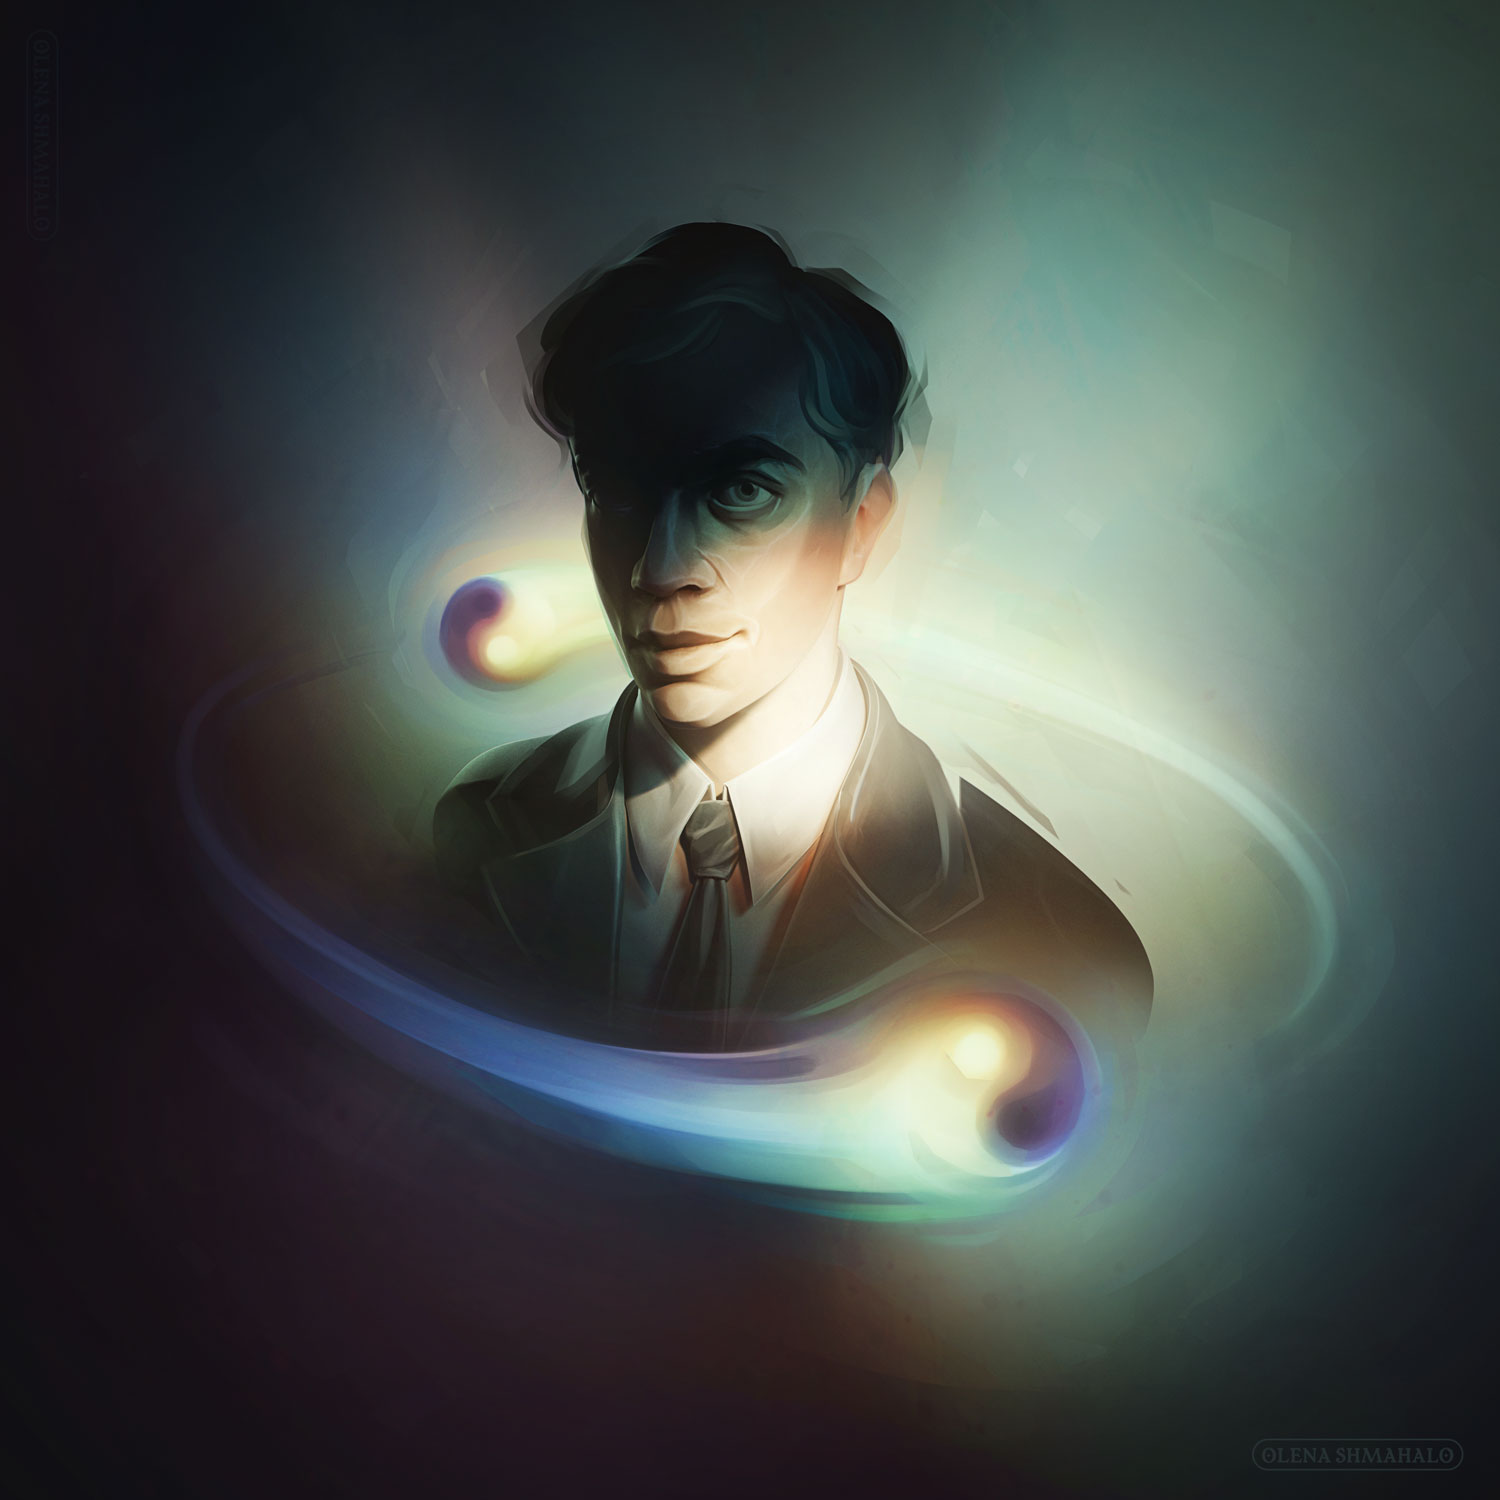 Painted portrait illustration of physicist Ettore Majorana, dramatically lit and partially in shadow, with anyons / Majorana fermions orbiting around him. Art by Olena Shmahalo for Science Magazine / AAAS.